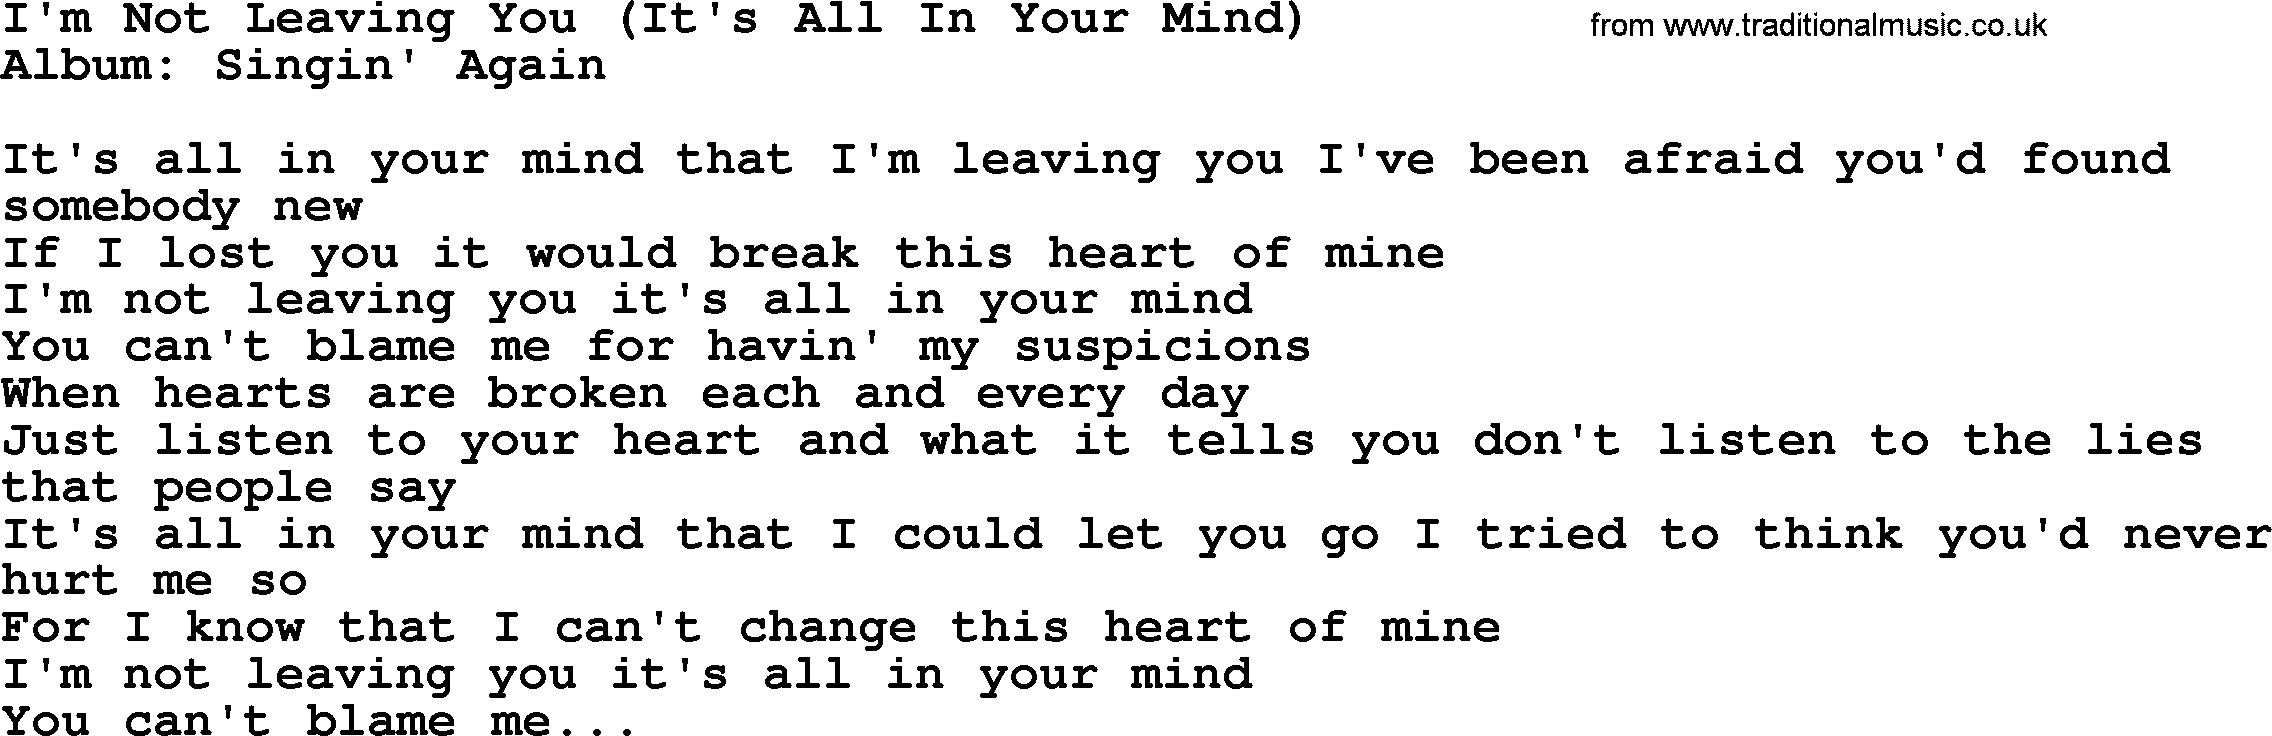 Loretta Lynn song: I'm Not Leaving You (It's All In Your Mind) lyrics